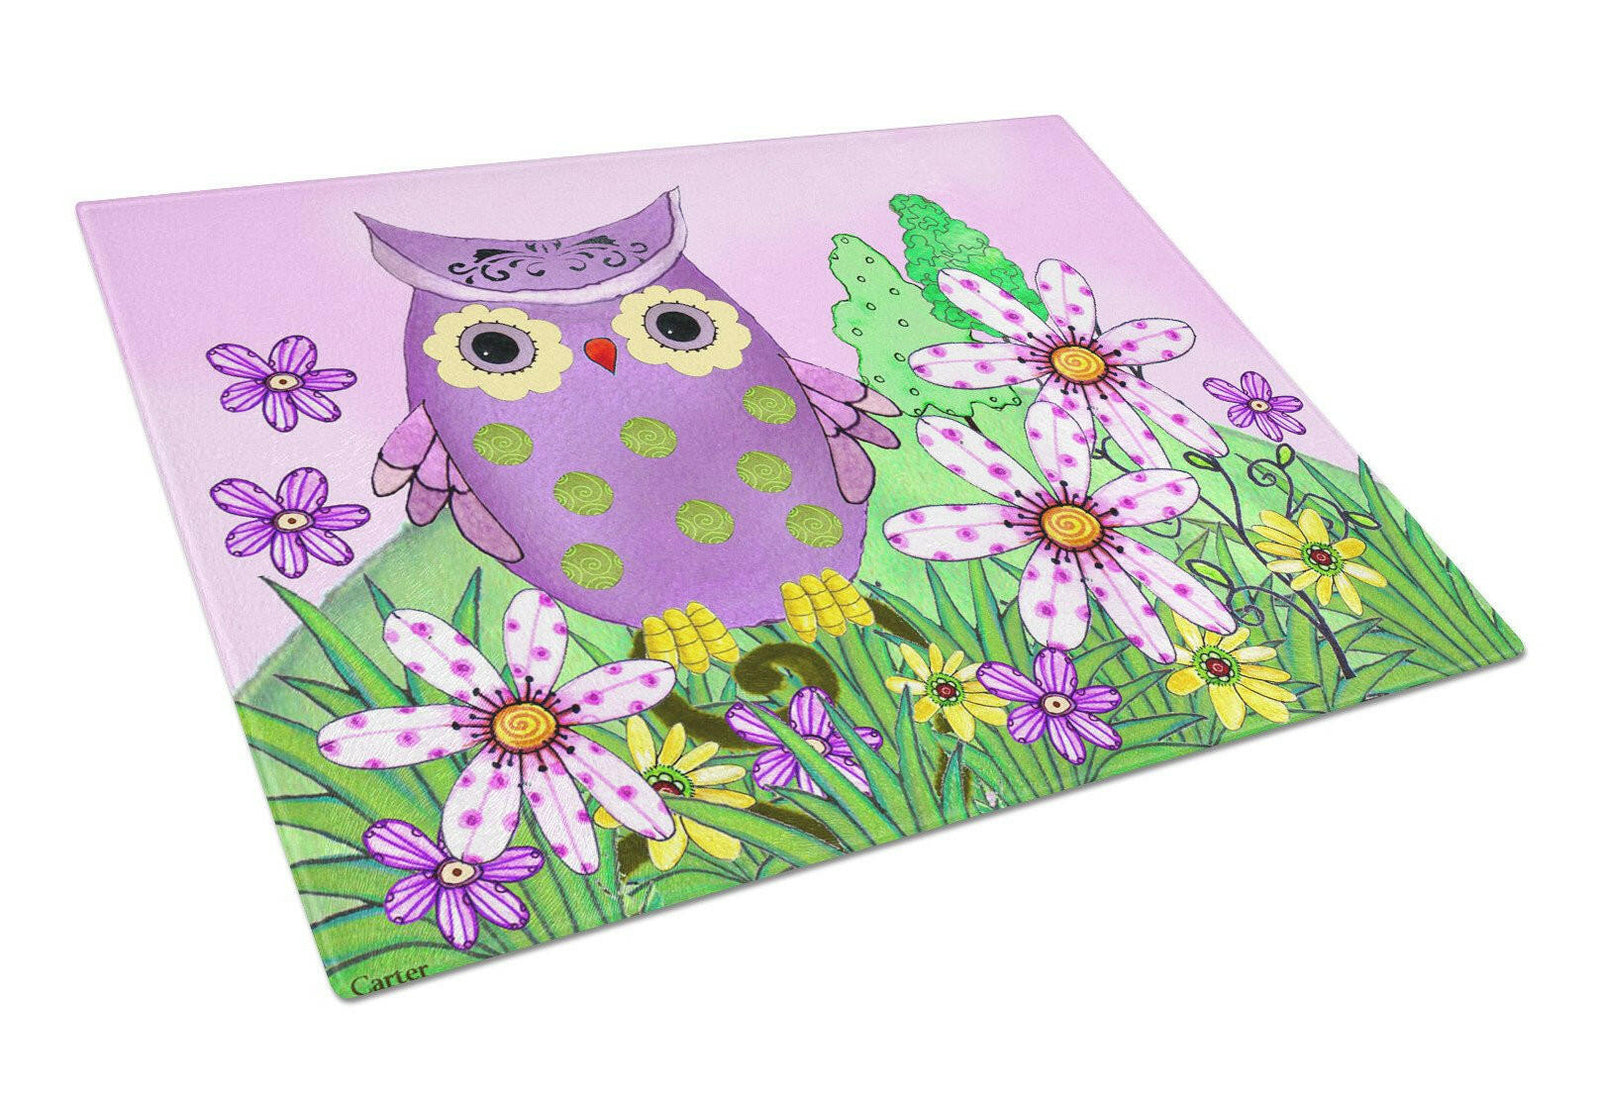 Who is Your Friend Owl Glass Cutting Board Large PJC1096LCB by Caroline's Treasures